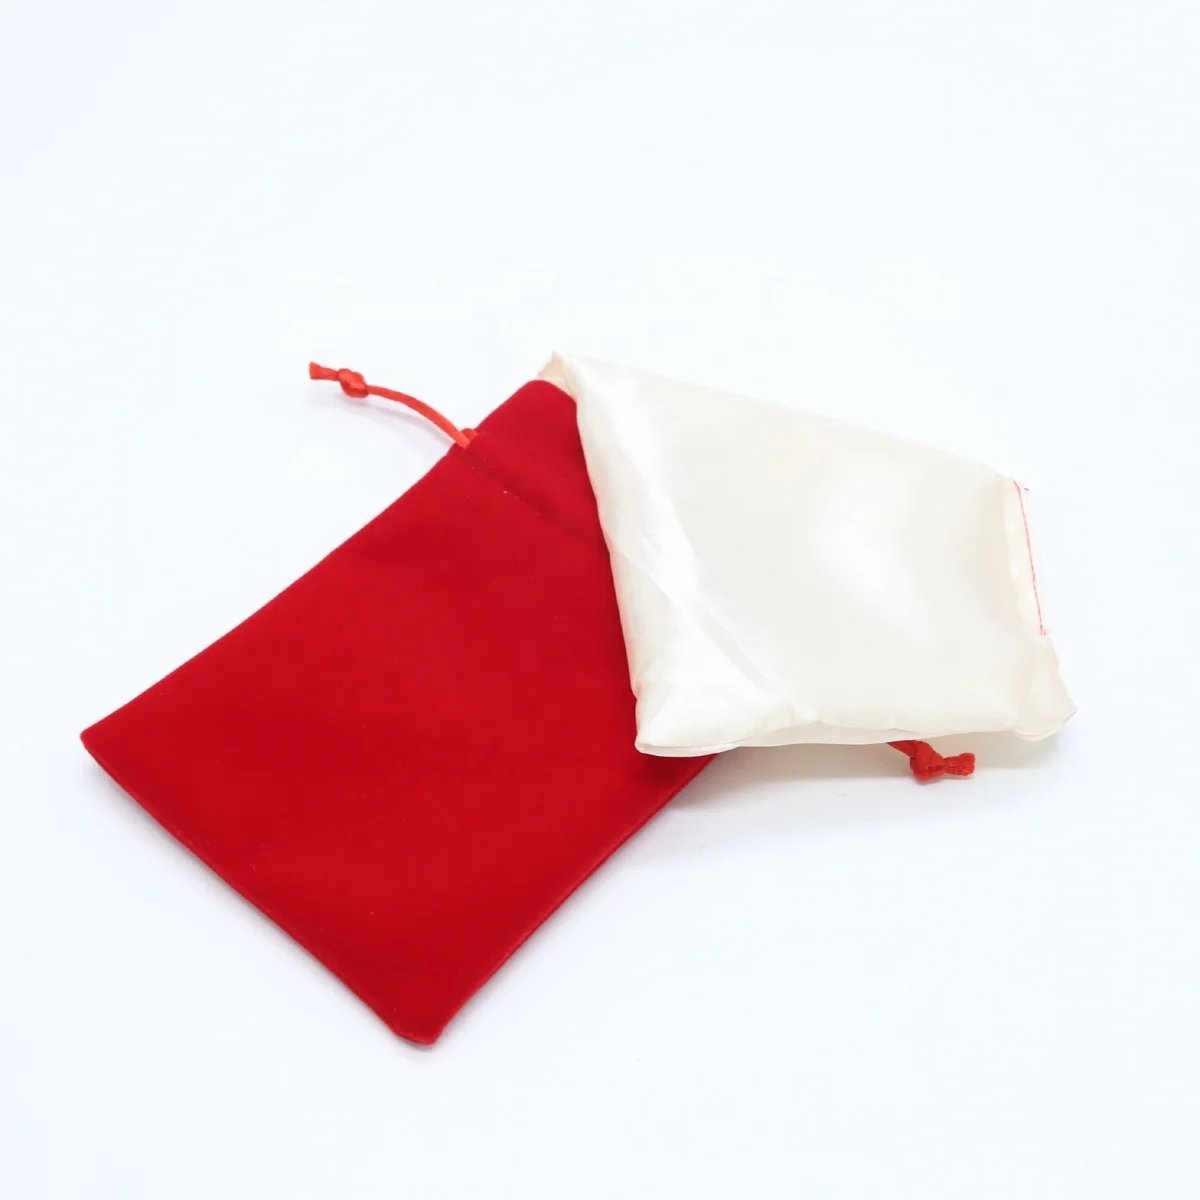 Hot Sale Velvet Gift Bag Watch Pouch With Drawstring Reusable Velvet Ring Earring Jewelry Pouch